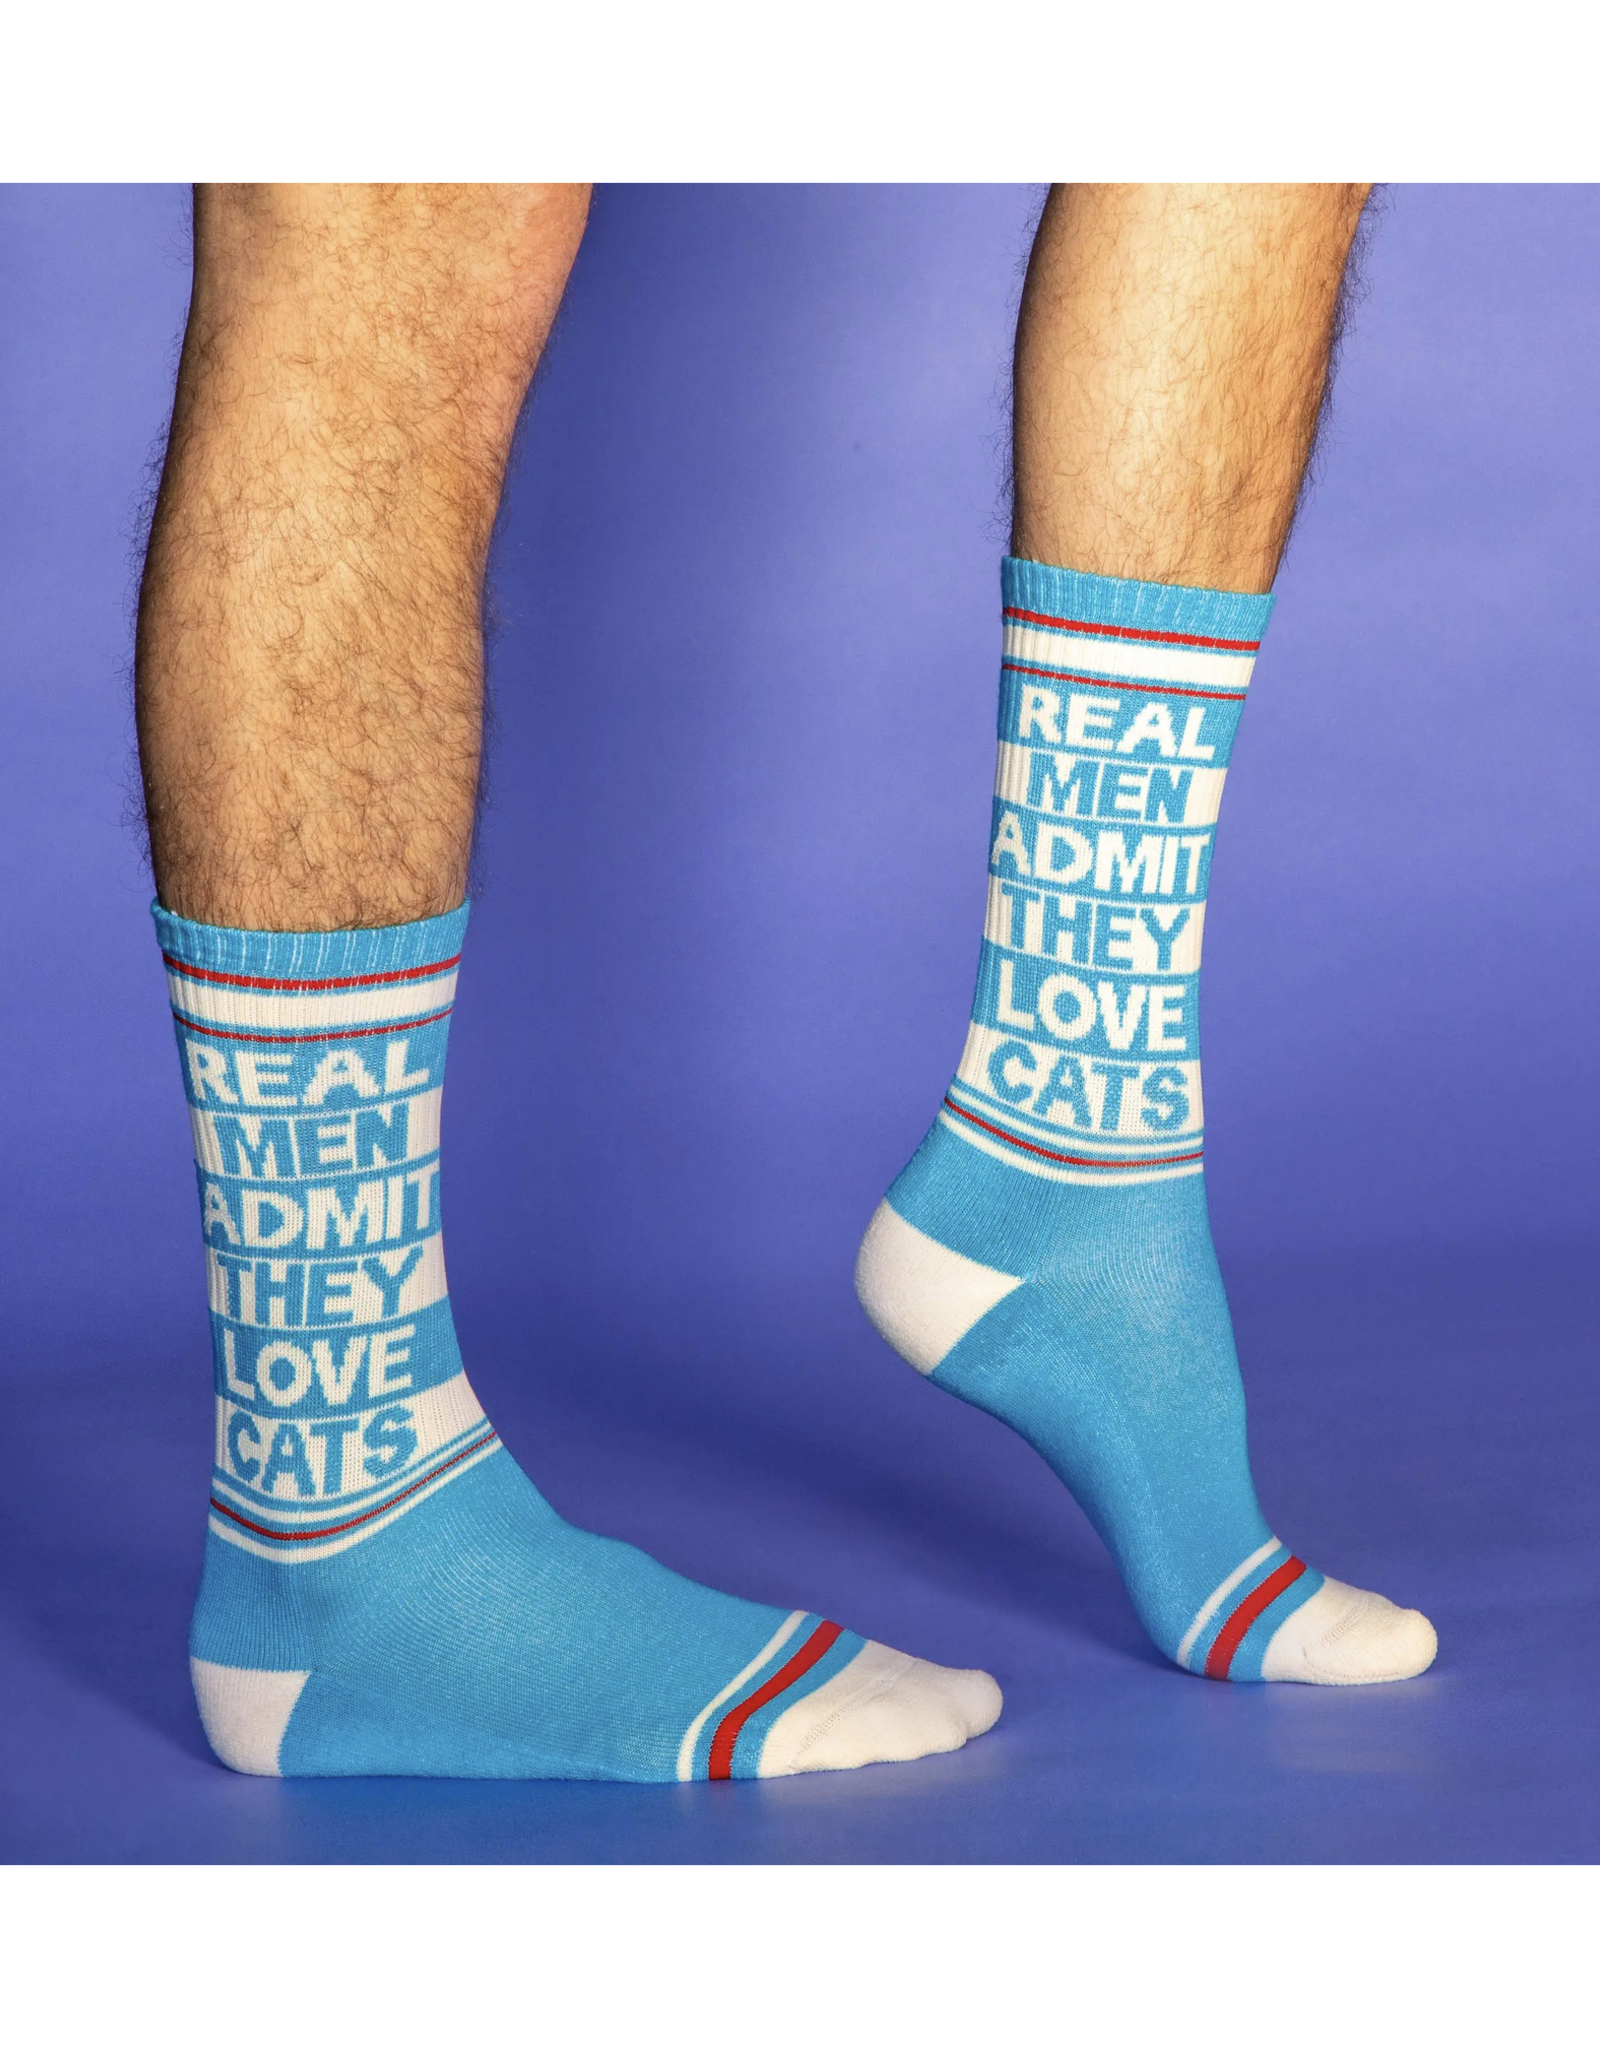 Real Men Admit They Love Cats Gym Socks